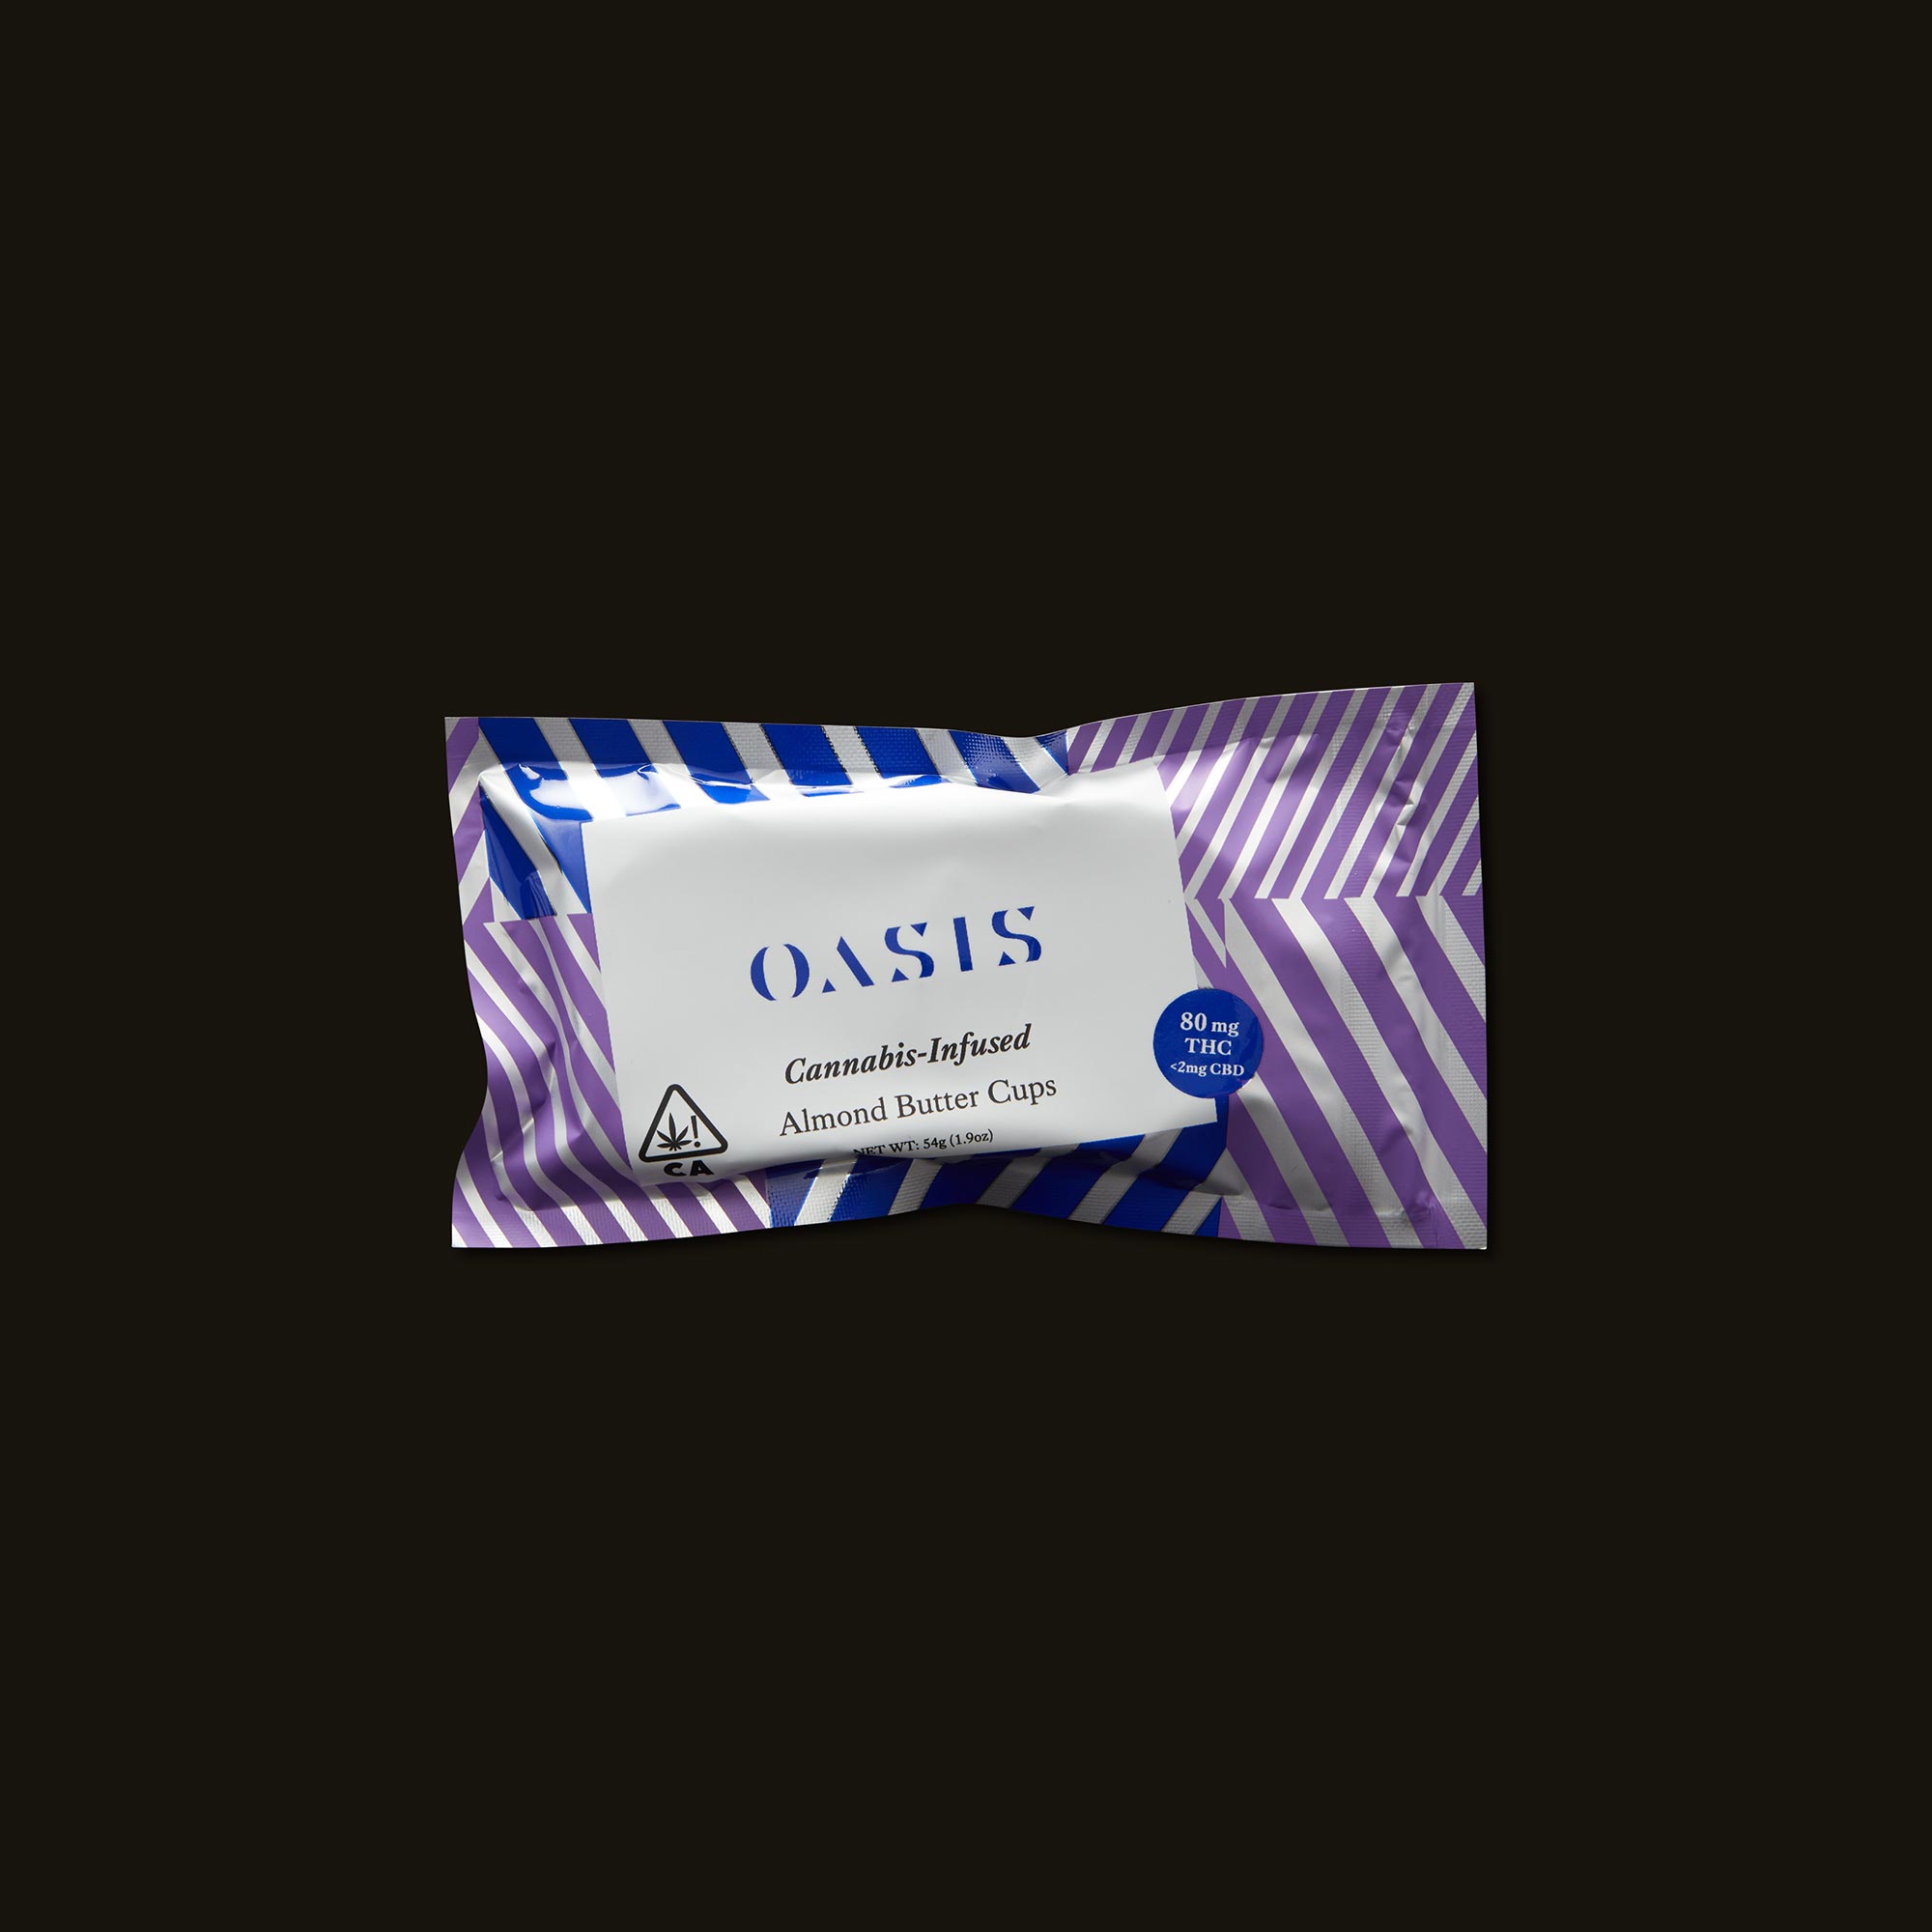 Oasis-Almond-Butter-Cups-Edible-Front-Packaging-CA-200479-811923